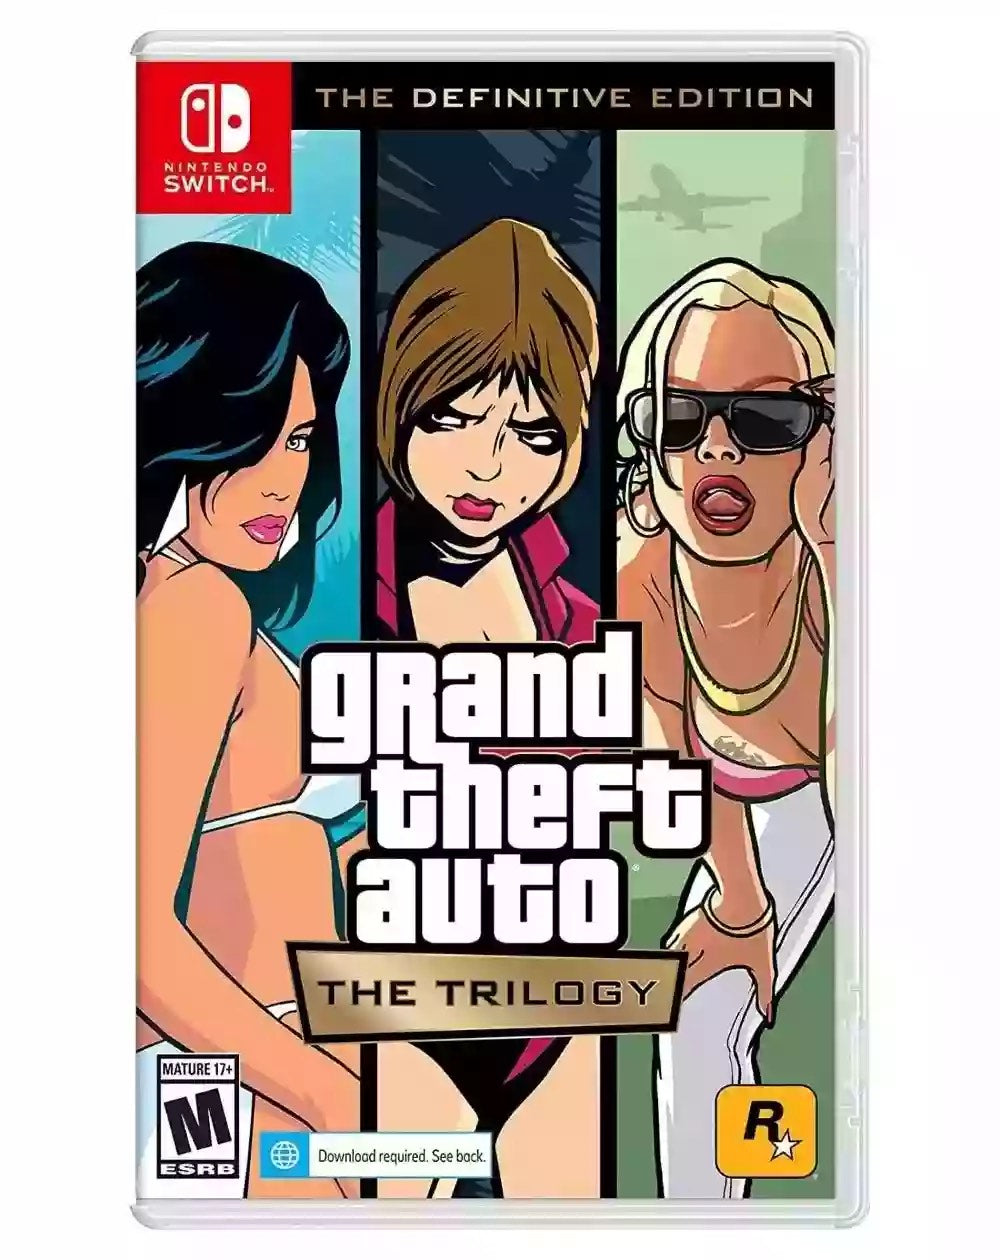 Grand Theft Auto: the Trilogy - The Definitive Edition. Nintendo Switch